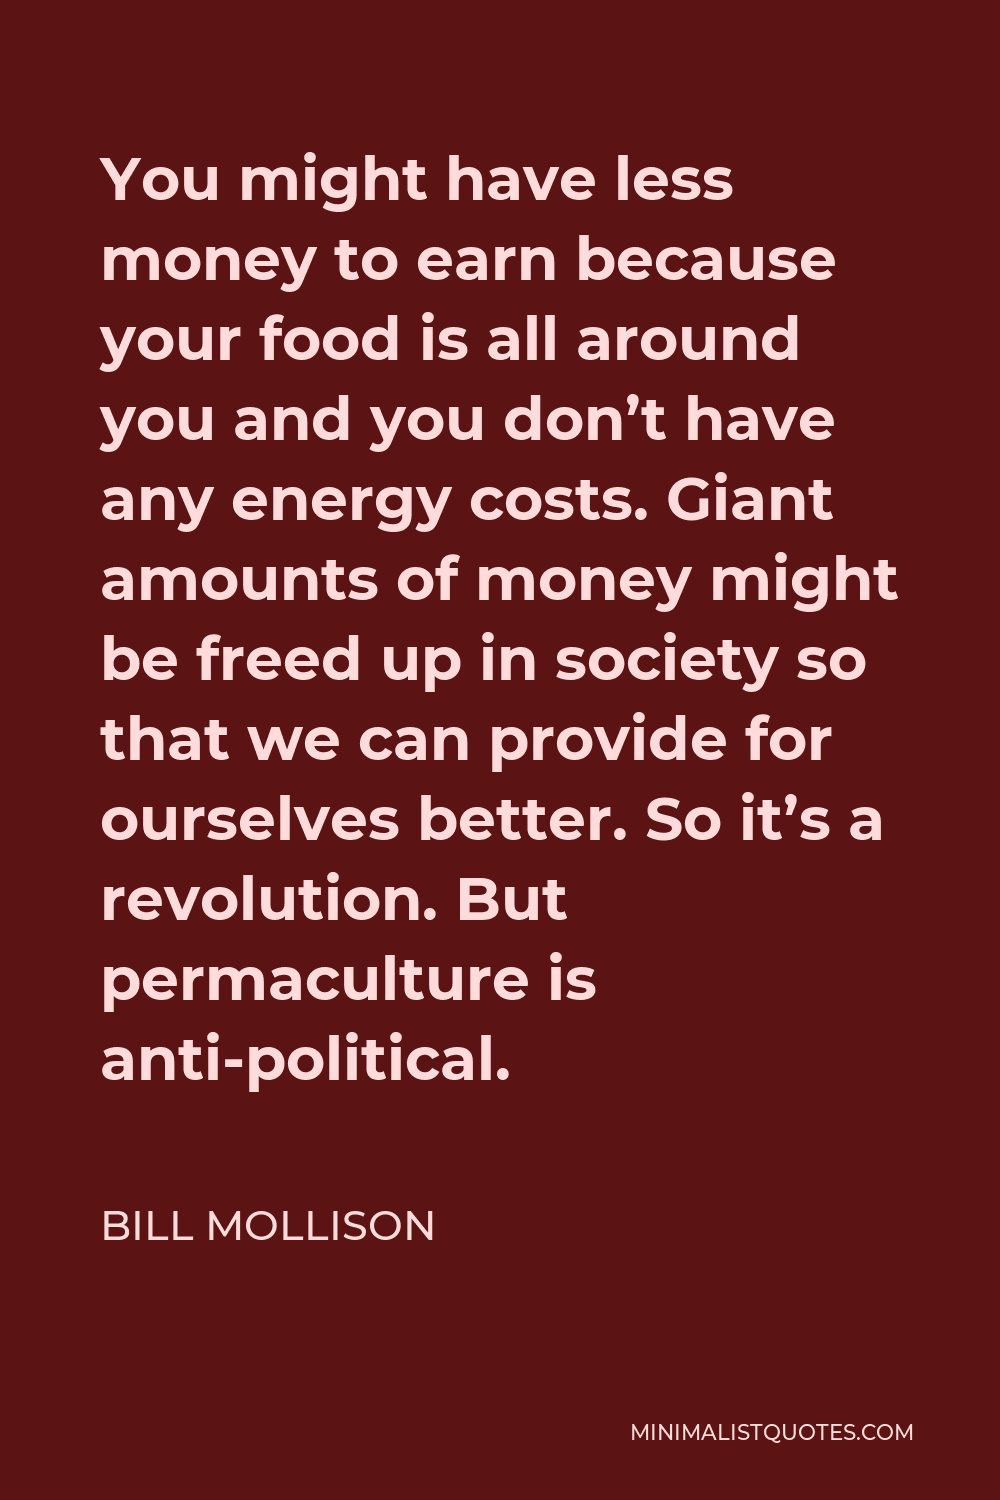 Bill Mollison Quote - You might have less money to earn because your food is all around you and you don’t have any energy costs. Giant amounts of money might be freed up in society so that we can provide for ourselves better. So it’s a revolution. But permaculture is anti-political.